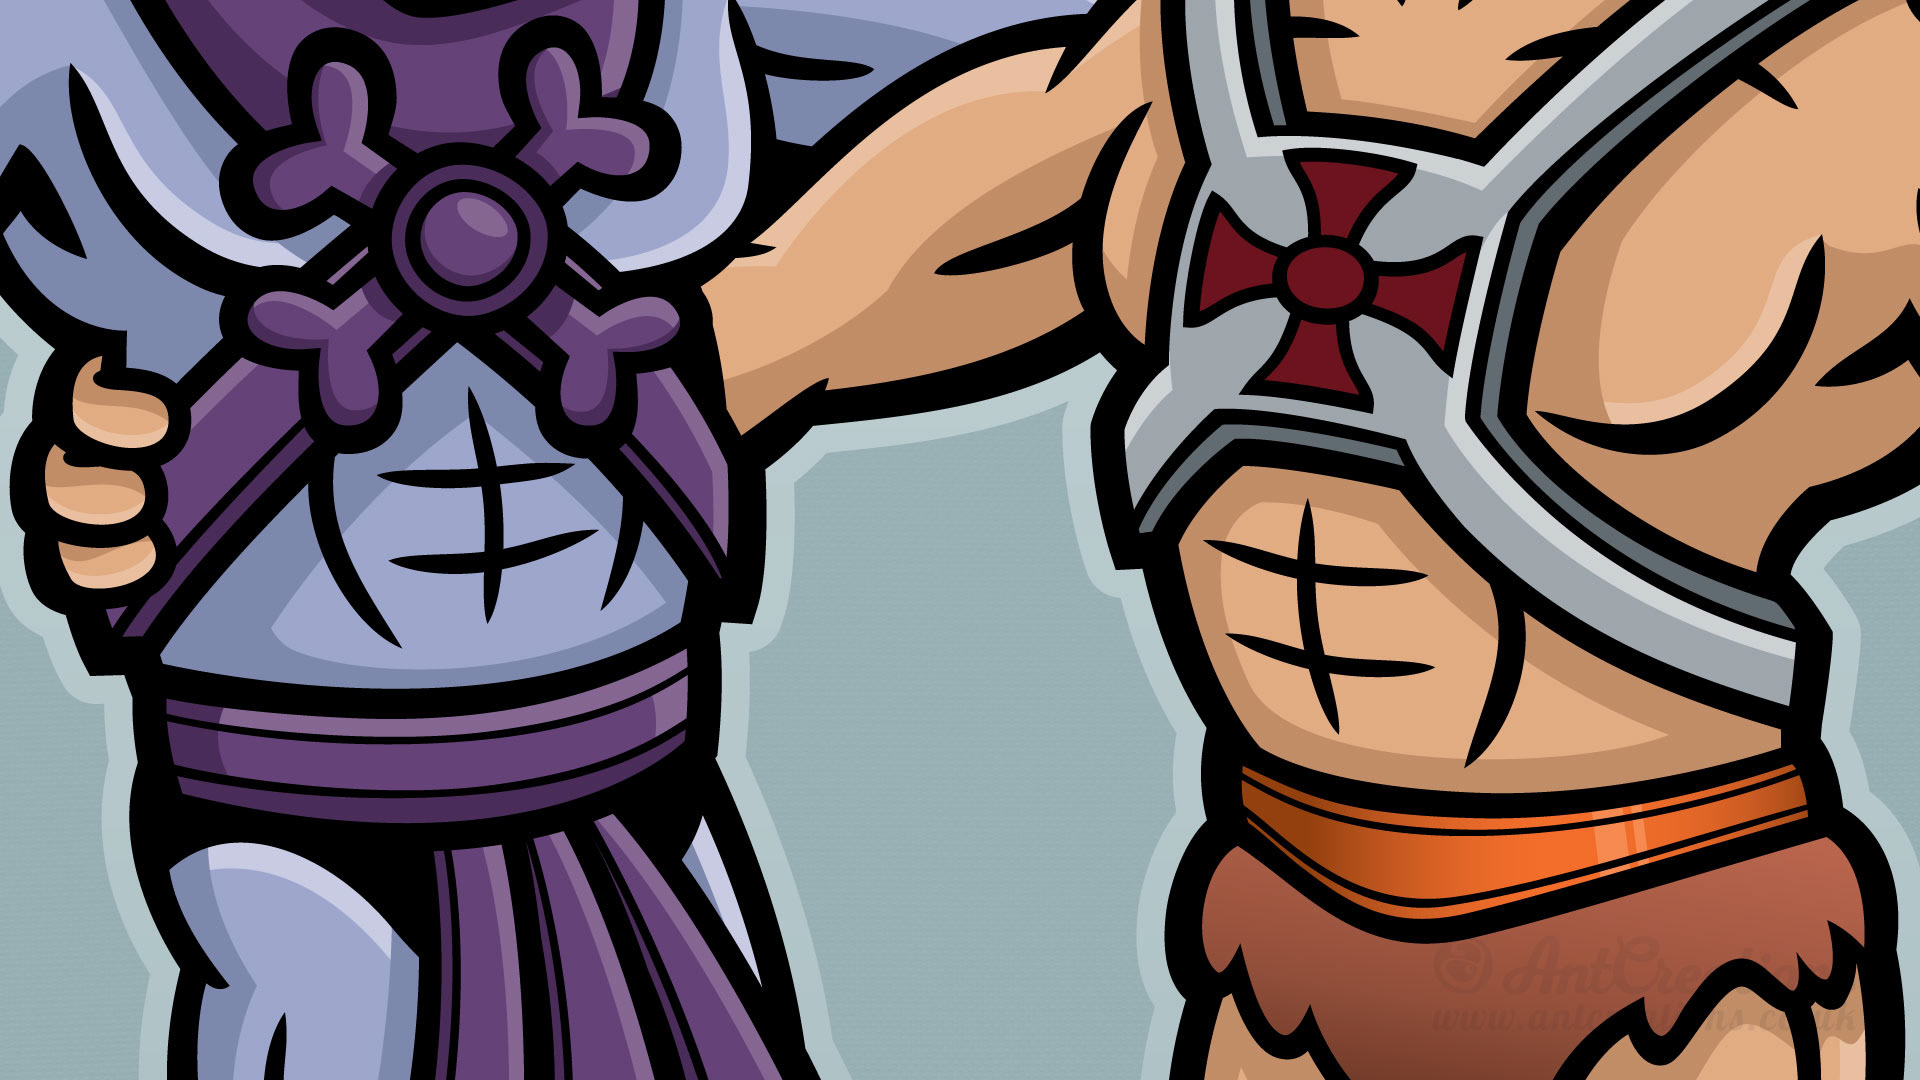 He-Man and Skeletor Cartoon Characters Illustration | Behance